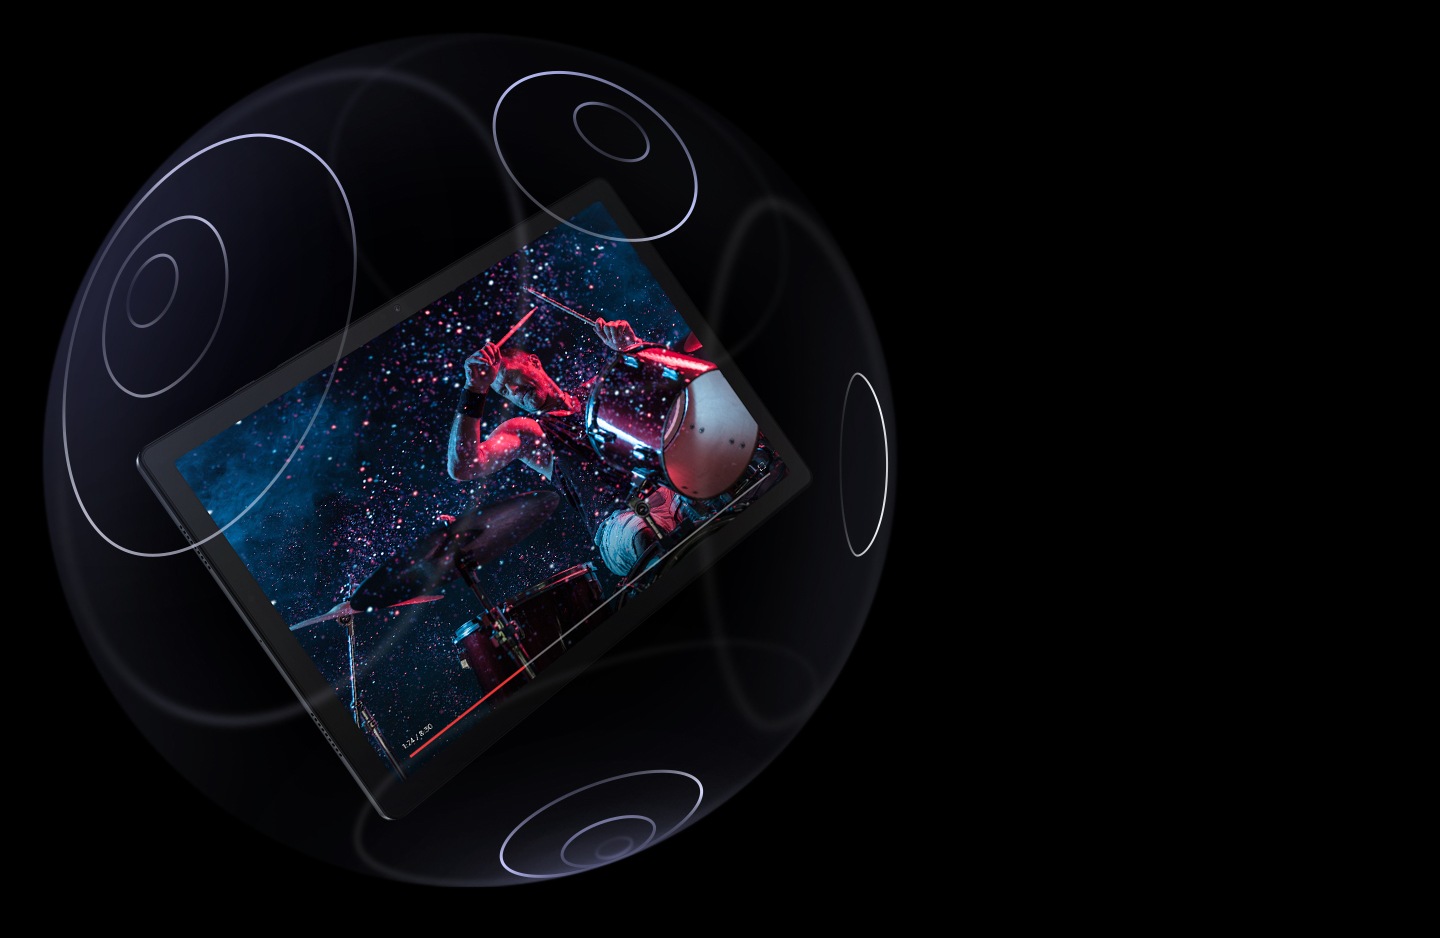 Samsung Tab A8 is shown floating inside a transparent sphere that has concentric circles marked on its surface. Screen shows a man playing drums, with a progress bar at the bottom.